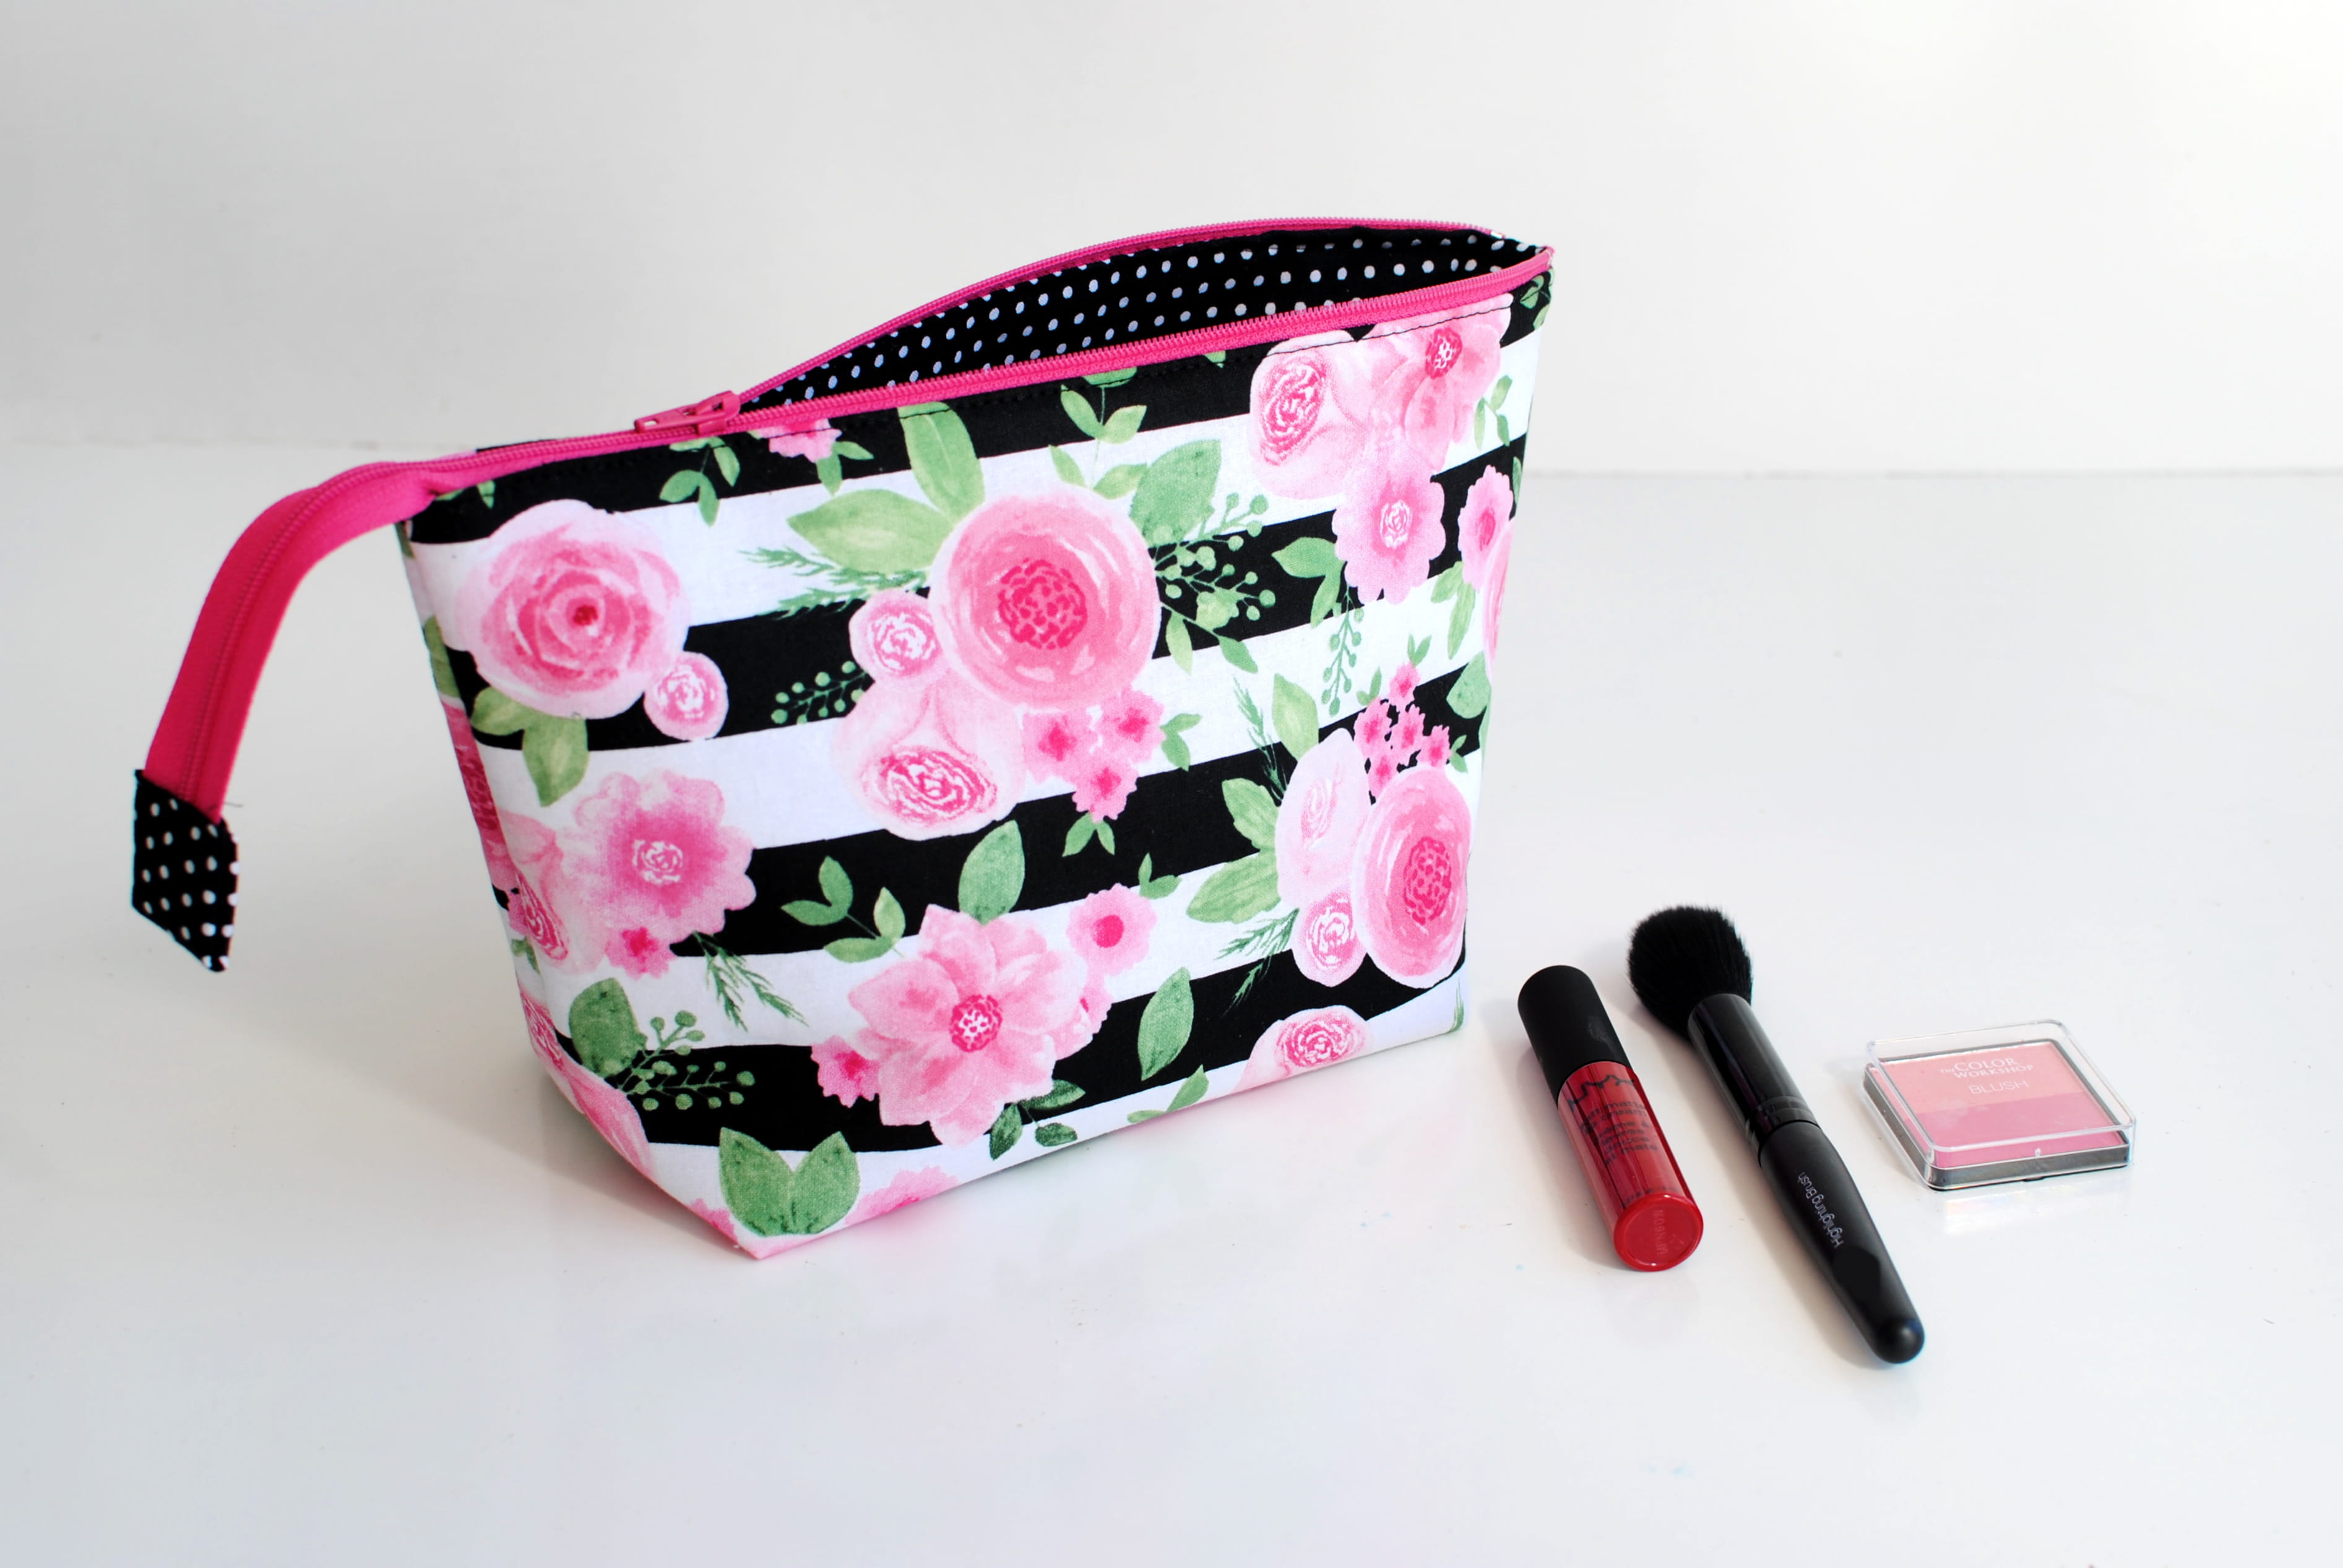 So Sew Easy Cosmetic Bag Pattern Discount - www.edoc.com.vn 1693911547